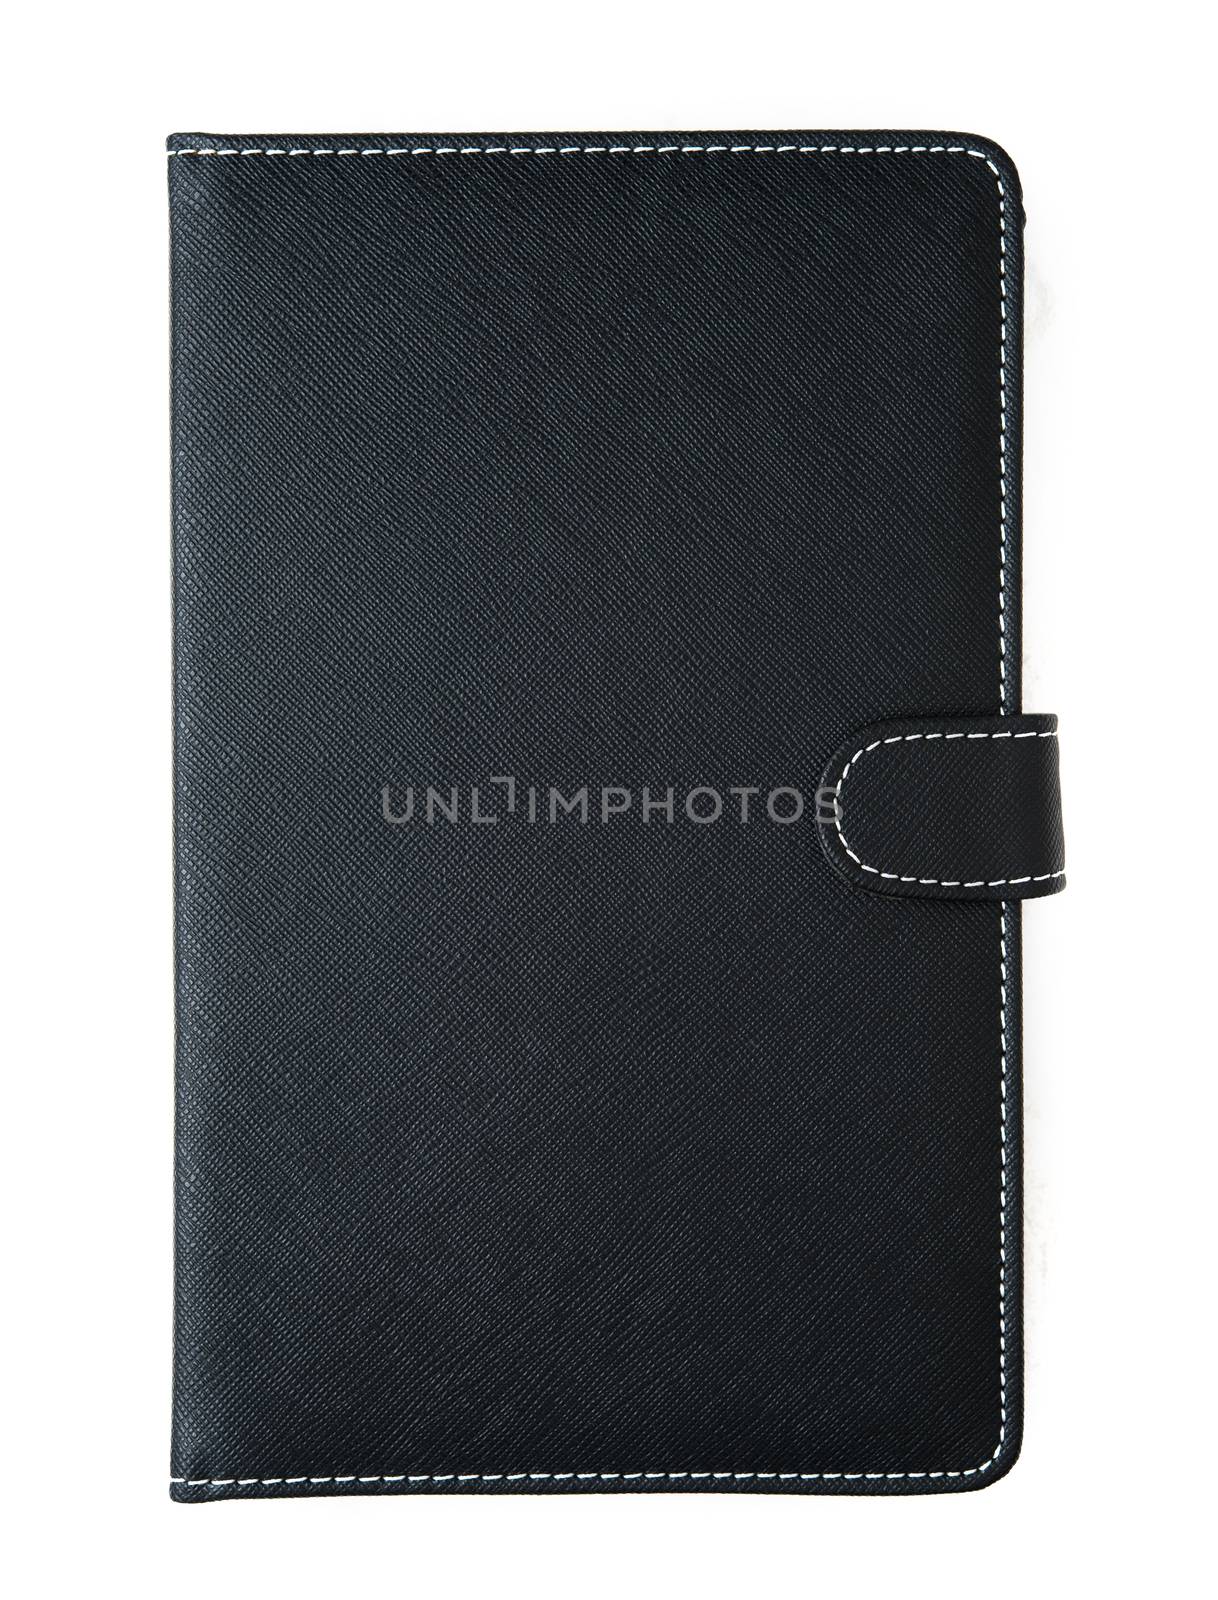 leather notebook by antpkr